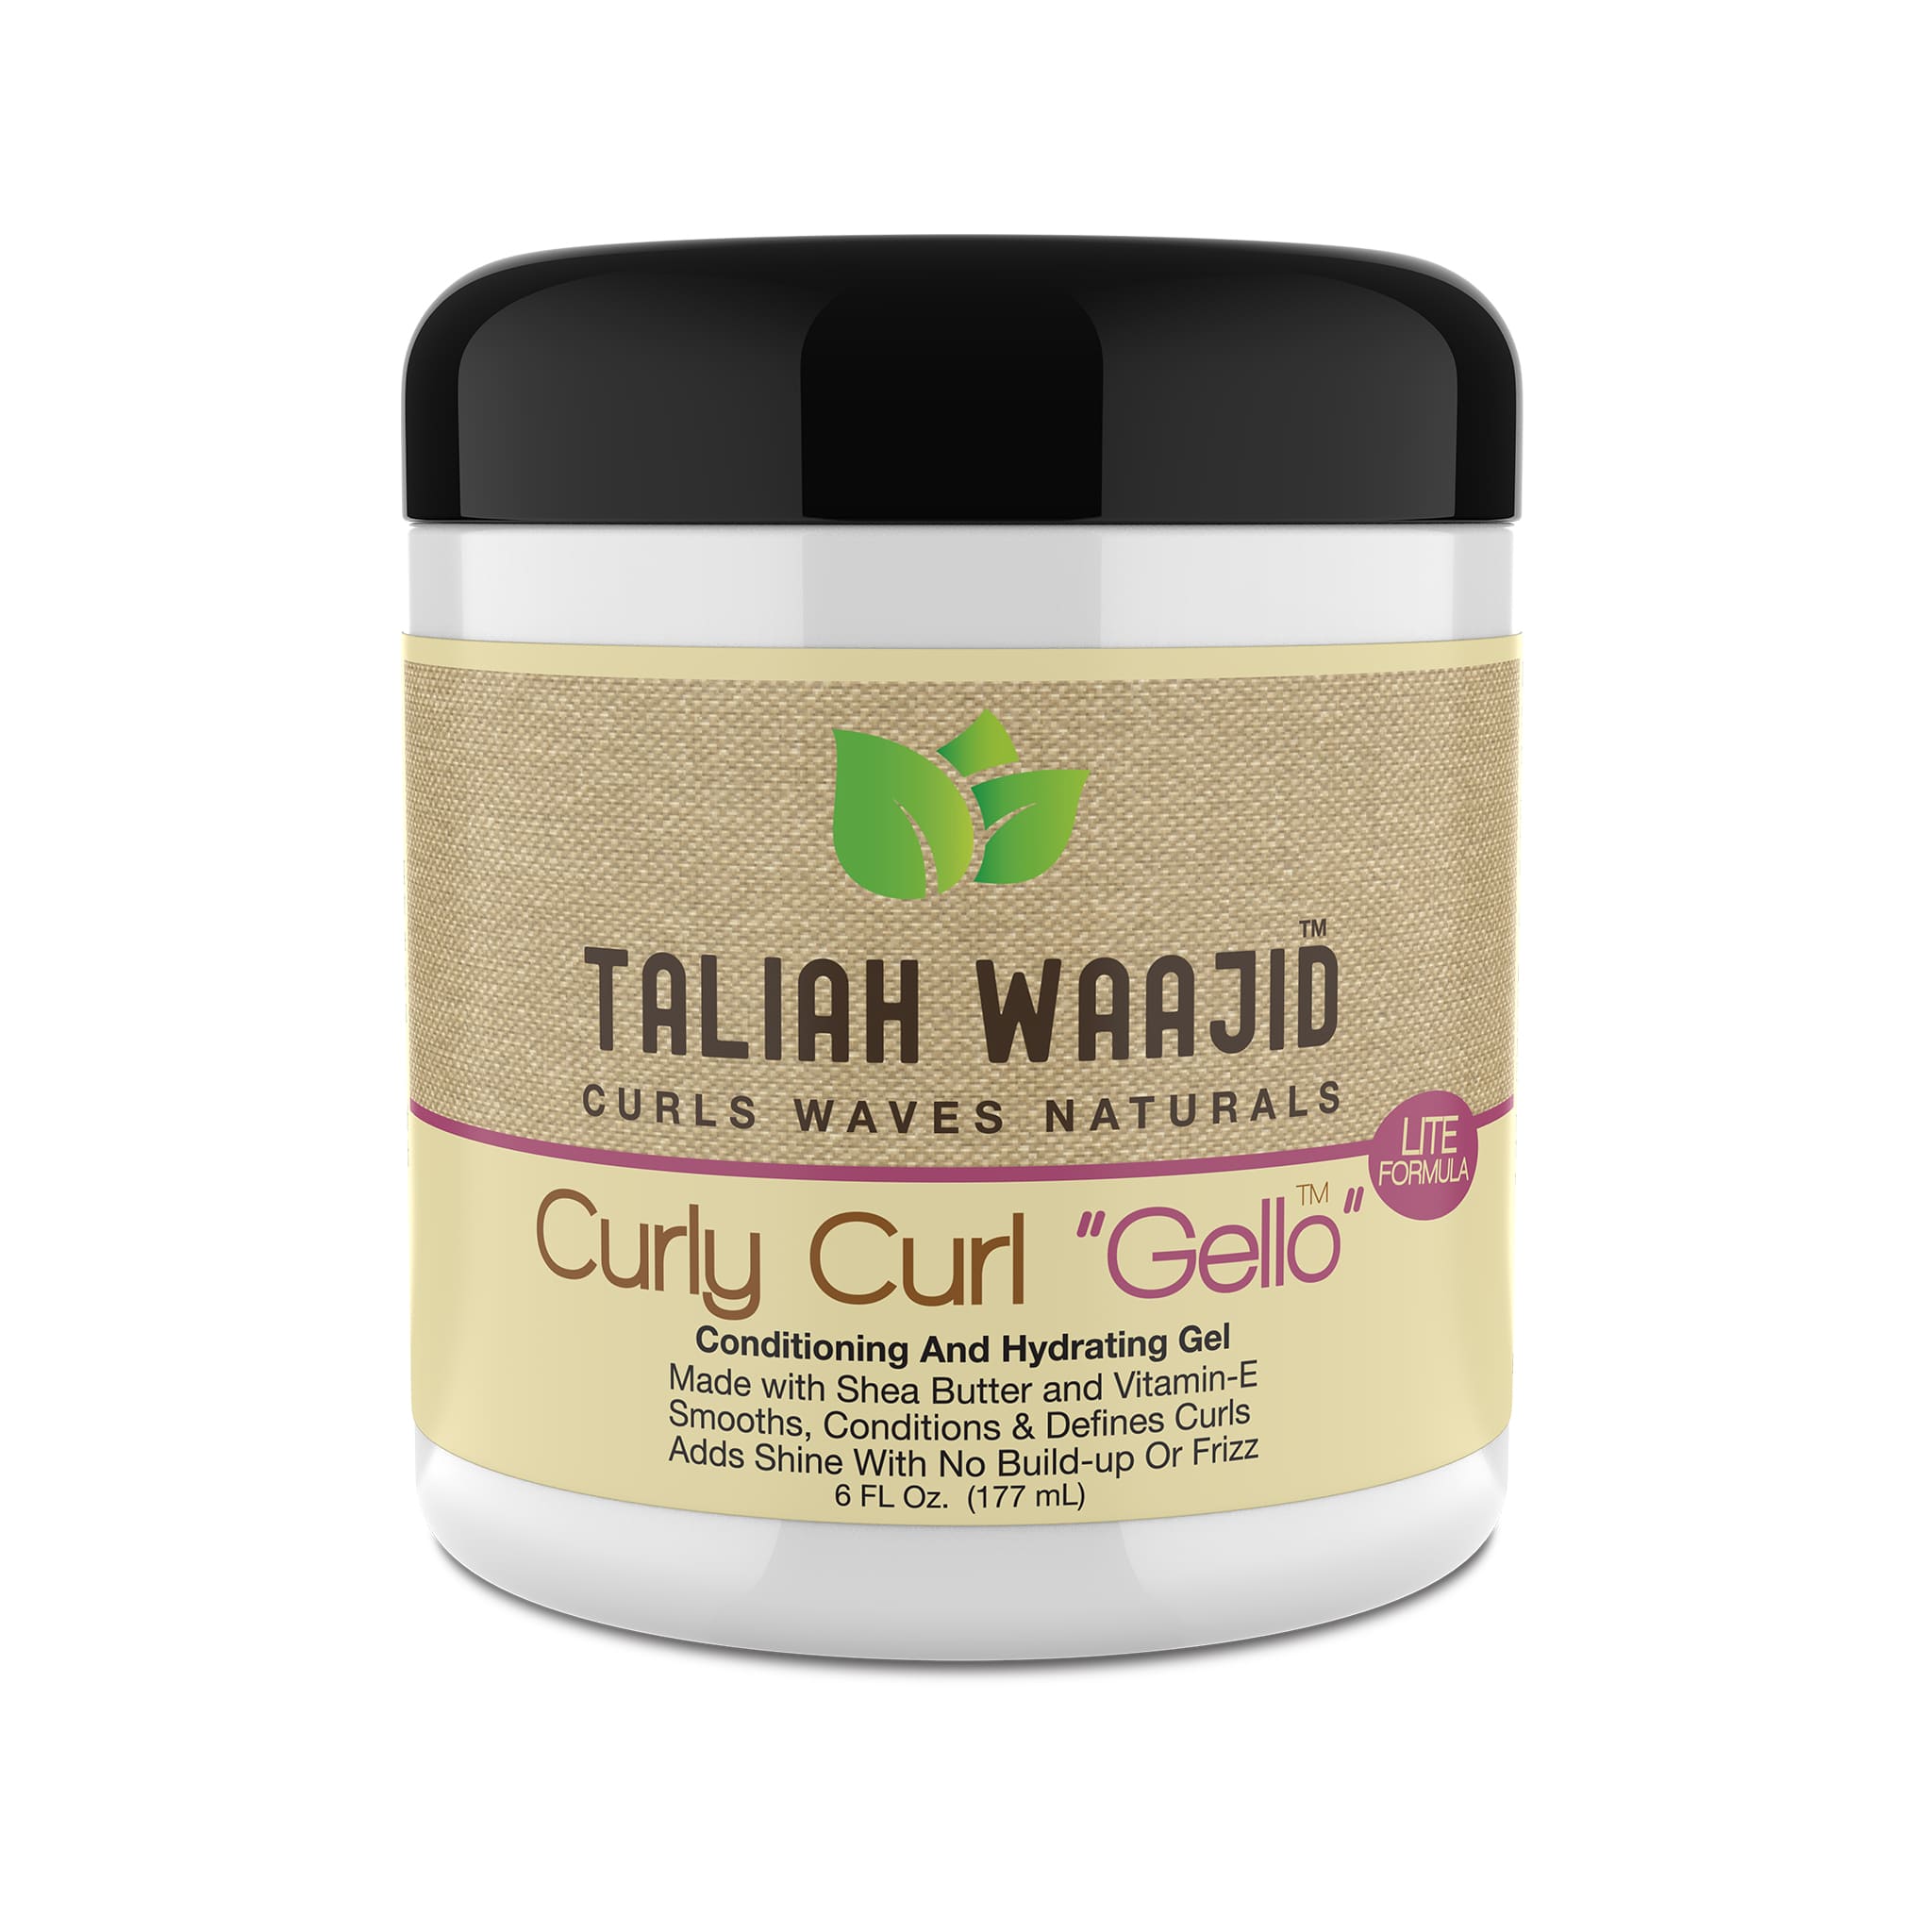 Taliah Waajid Curls Waves Natural Curly Curl “Gello” 6oz - Hydrating Gel That Stops Frizz and Adds Moisture To Your Hair - image 1 of 6